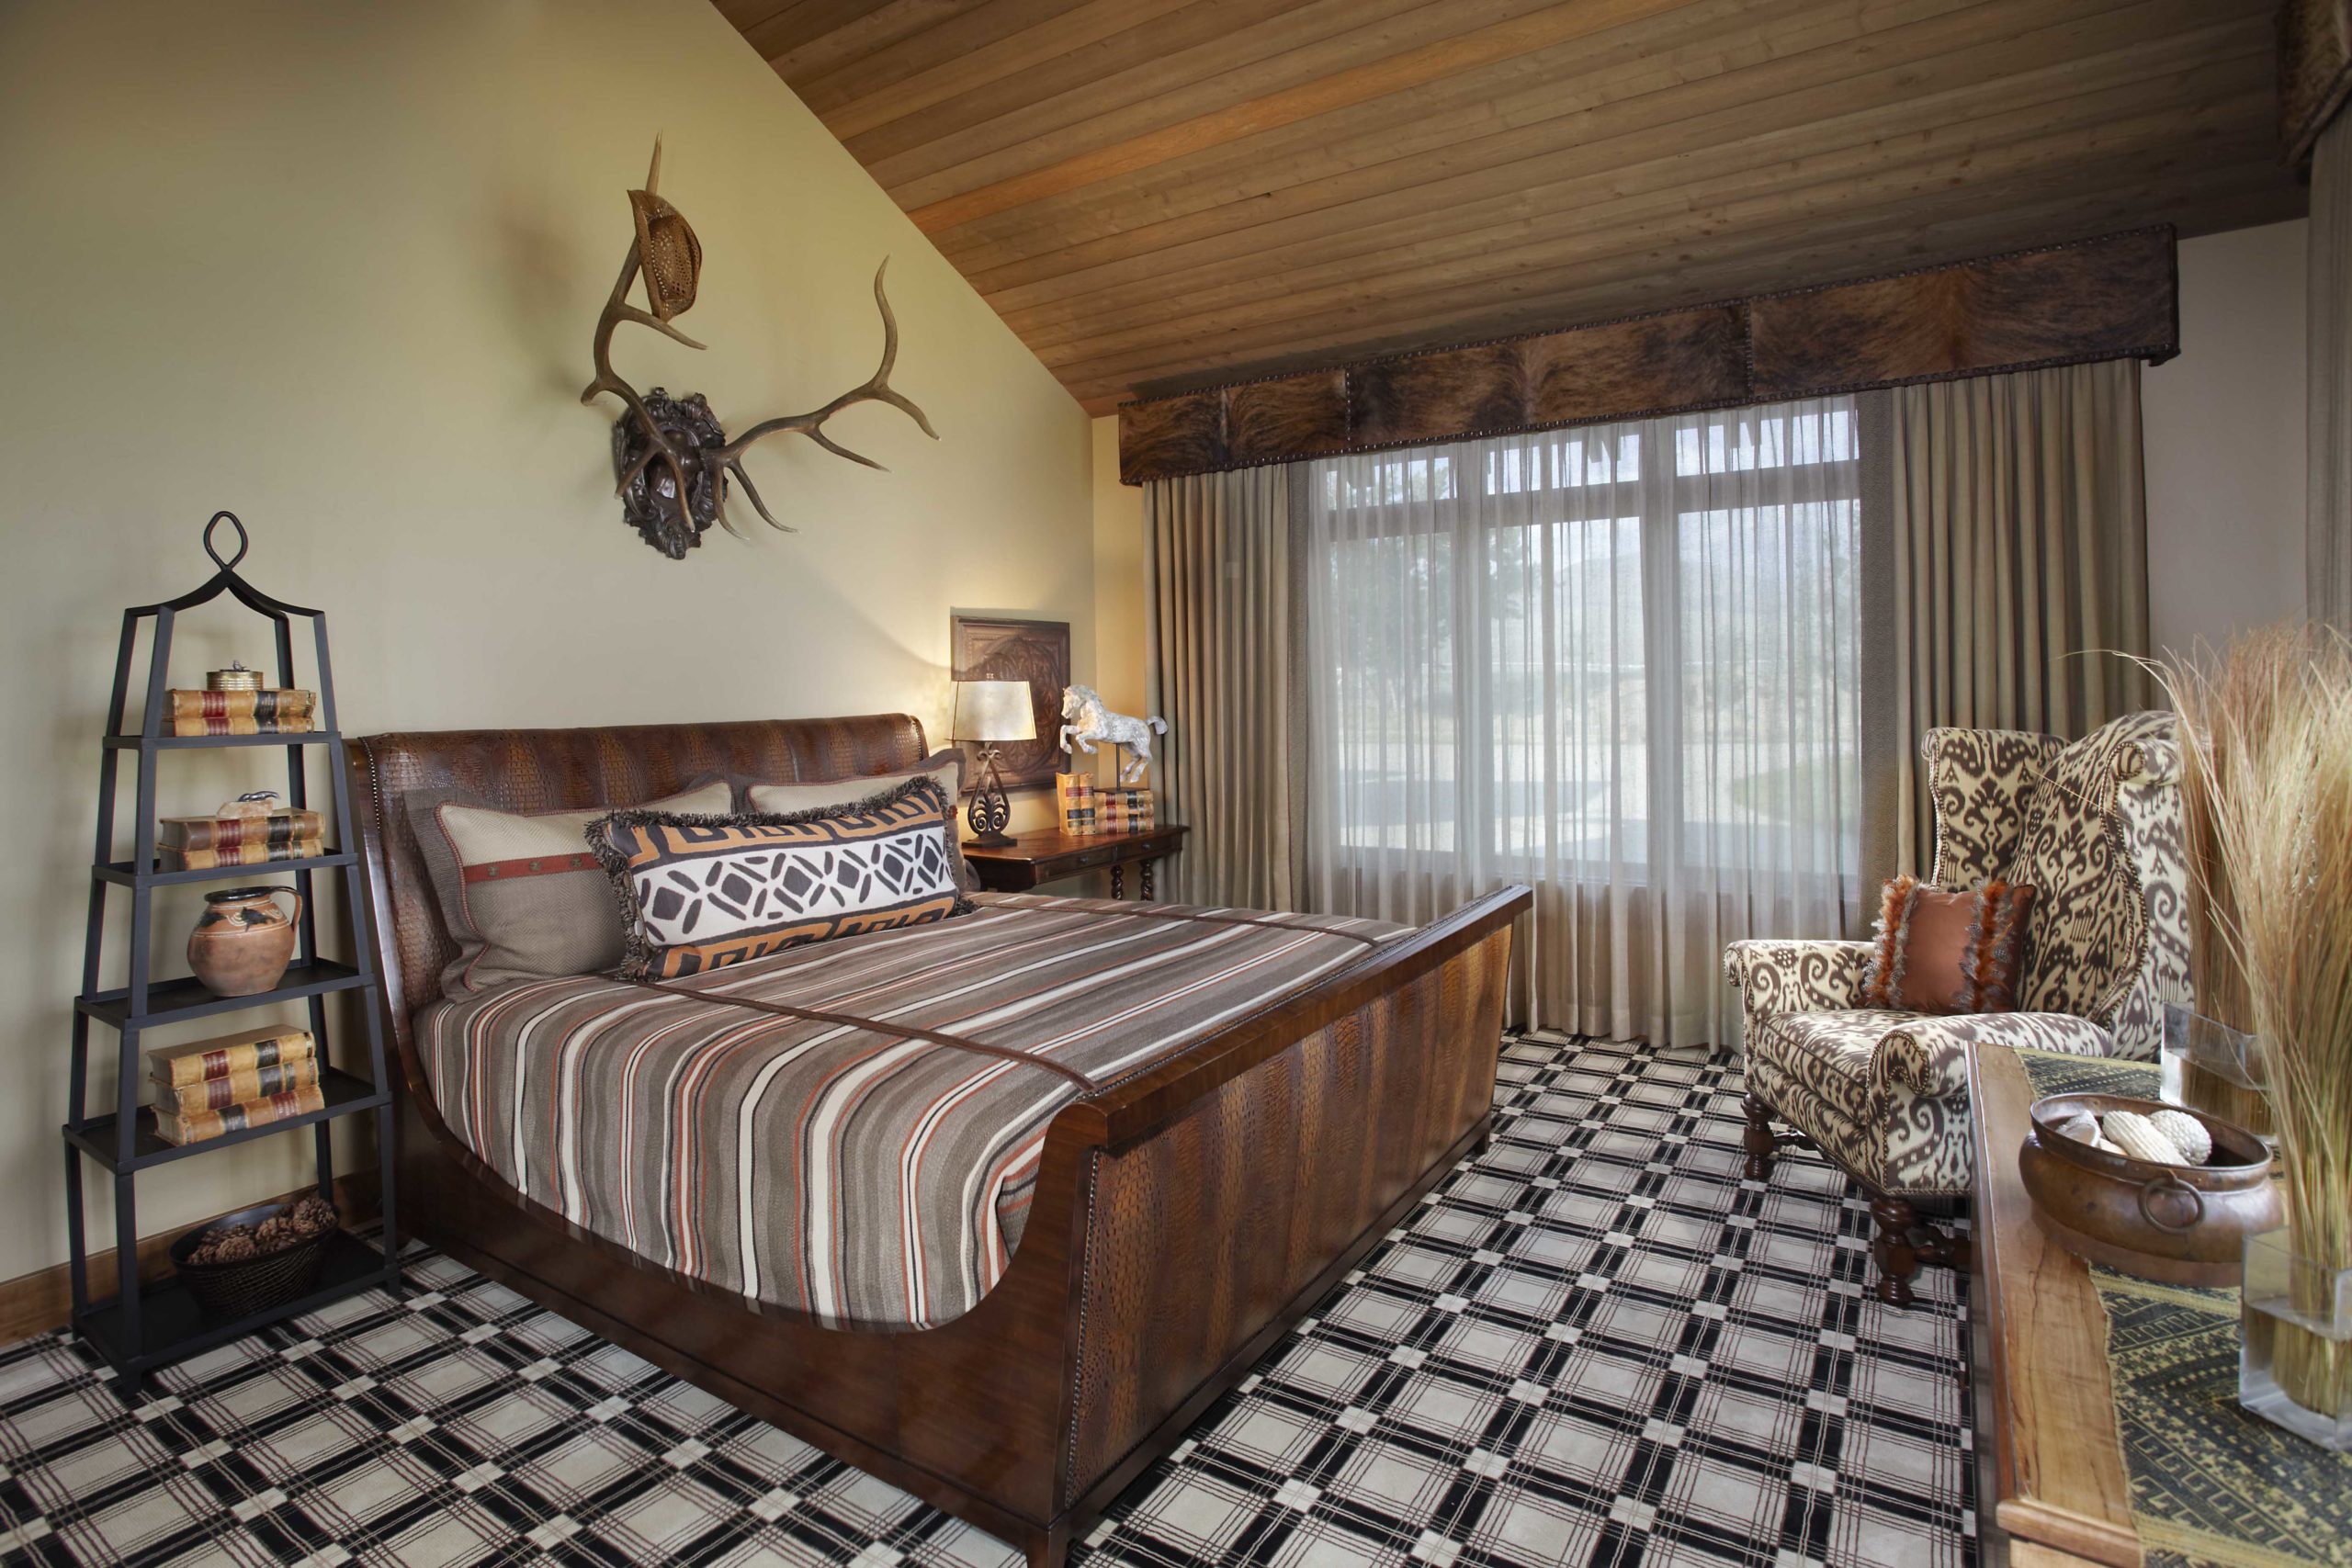 Bedroom with plaid carpet, a dark wooden and leather bed frame and antlers hanging above the bed